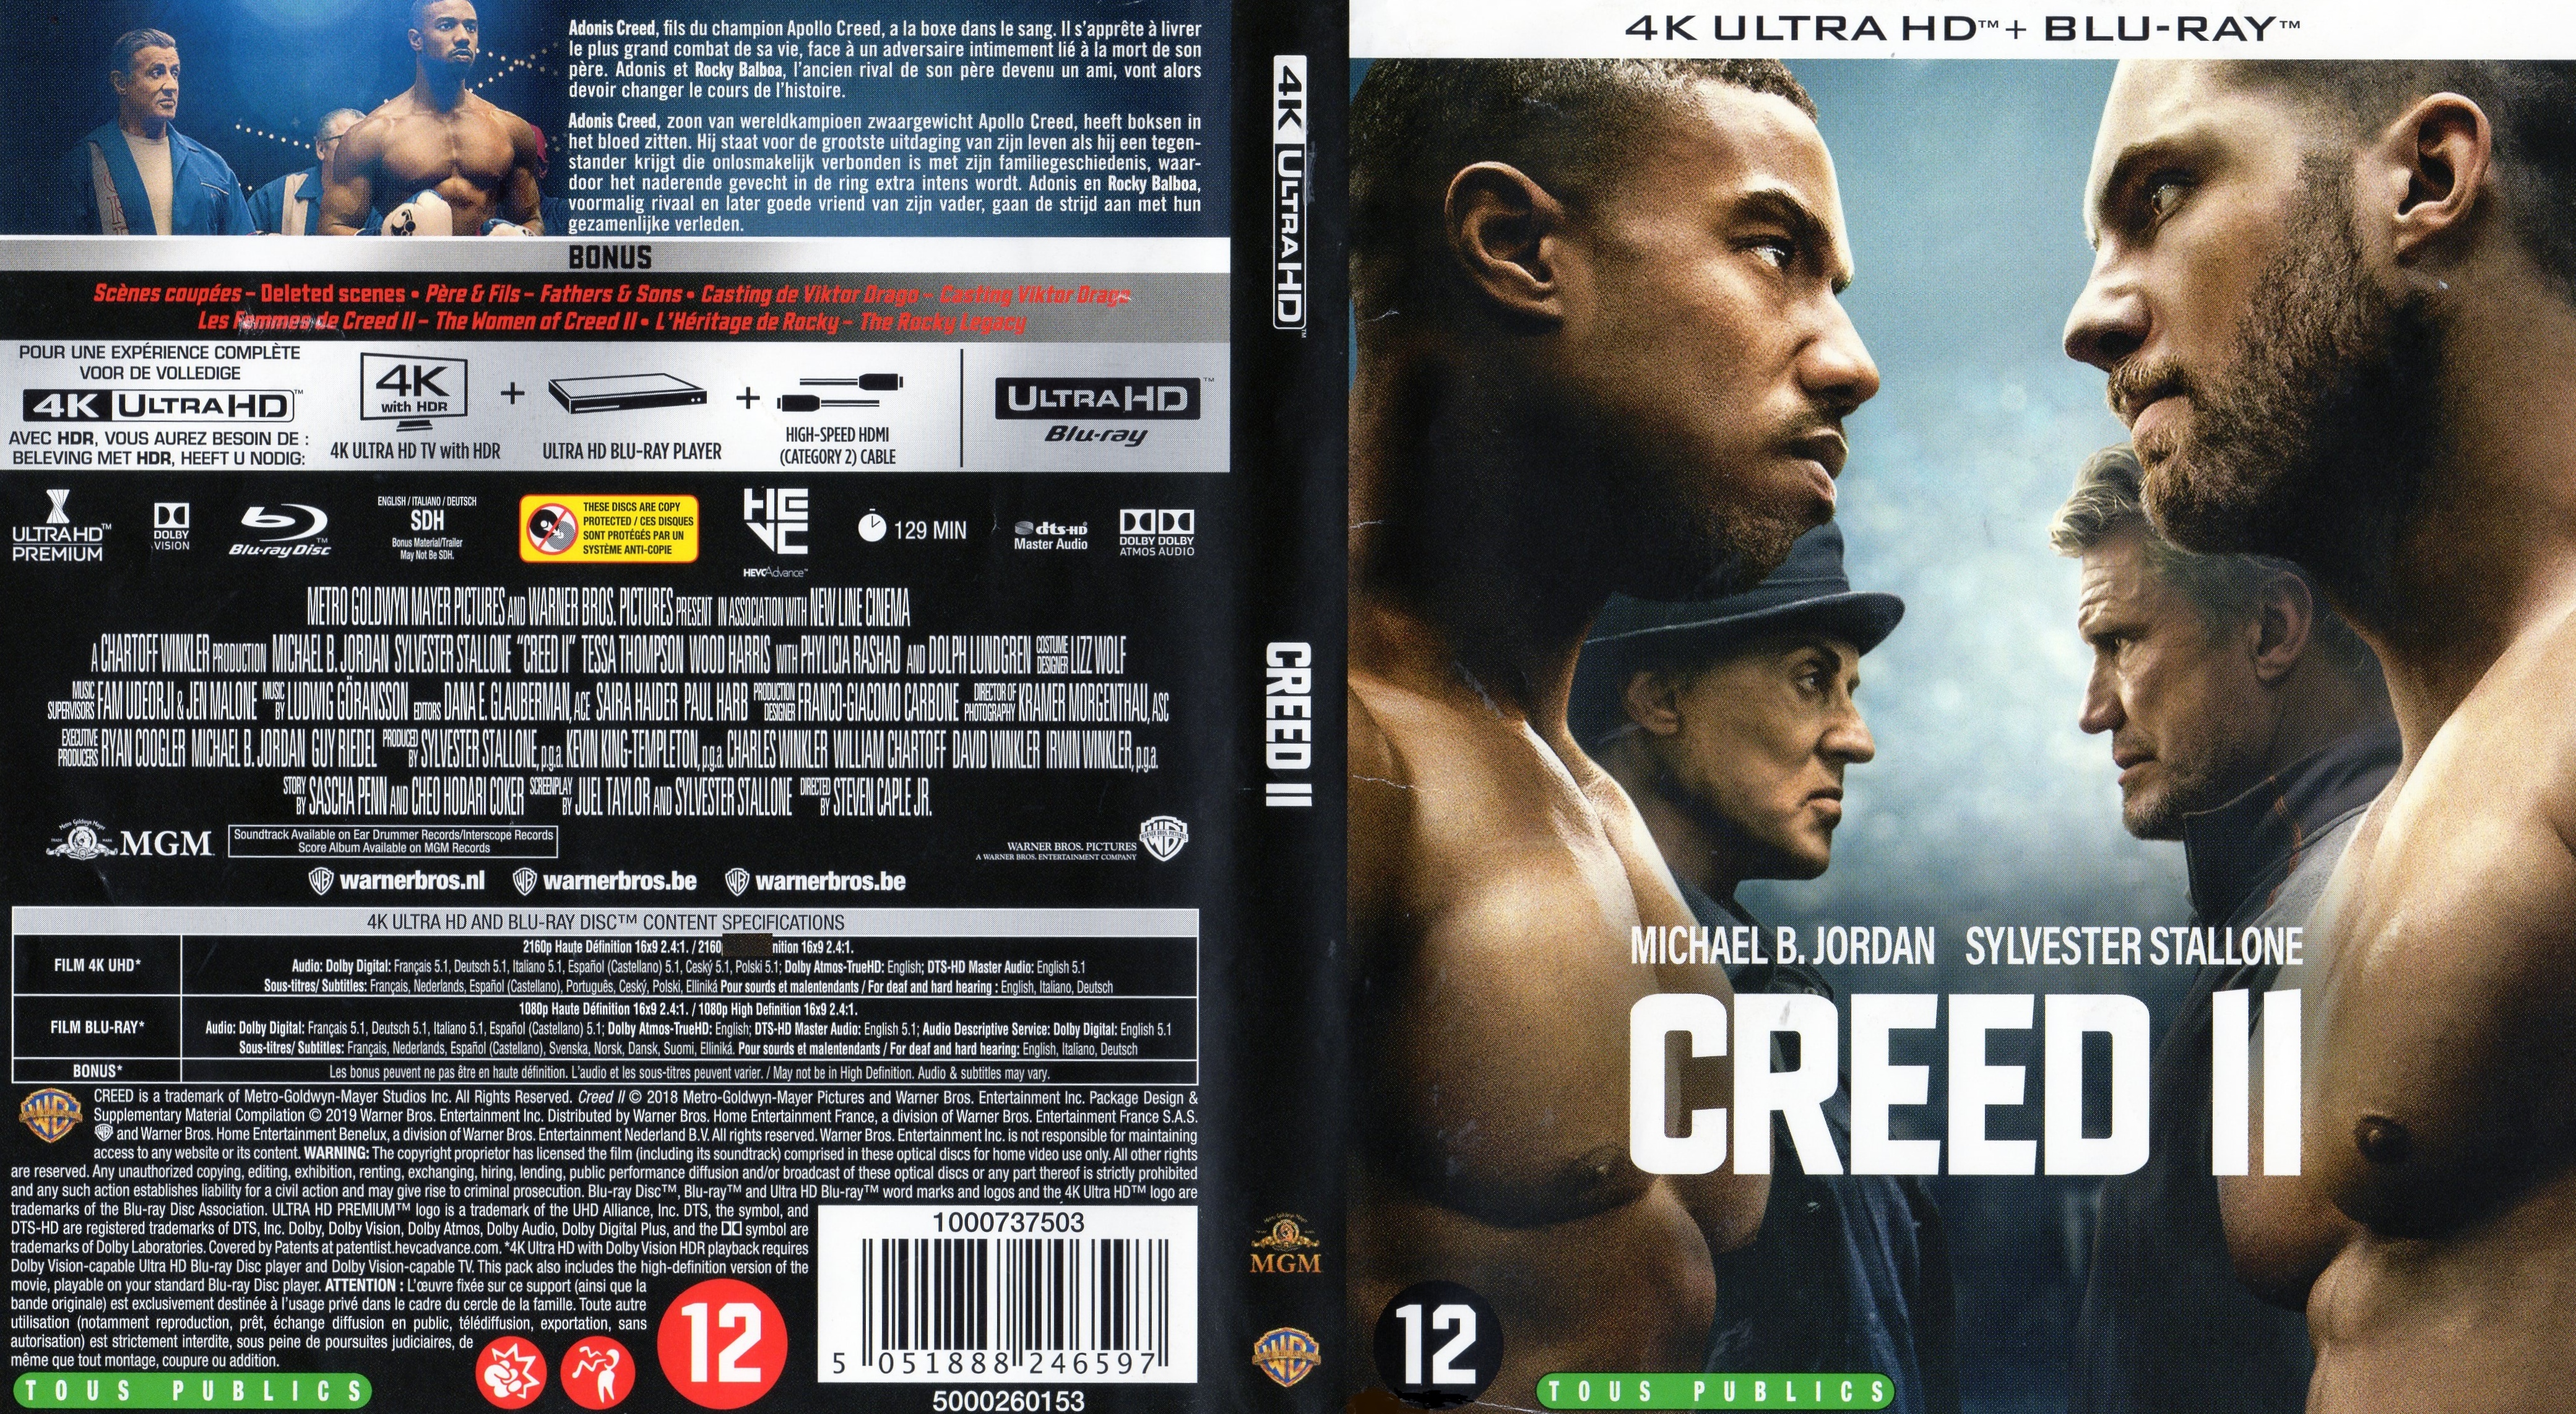 Jaquette DVD Creed 2 4K (BLU-RAY)